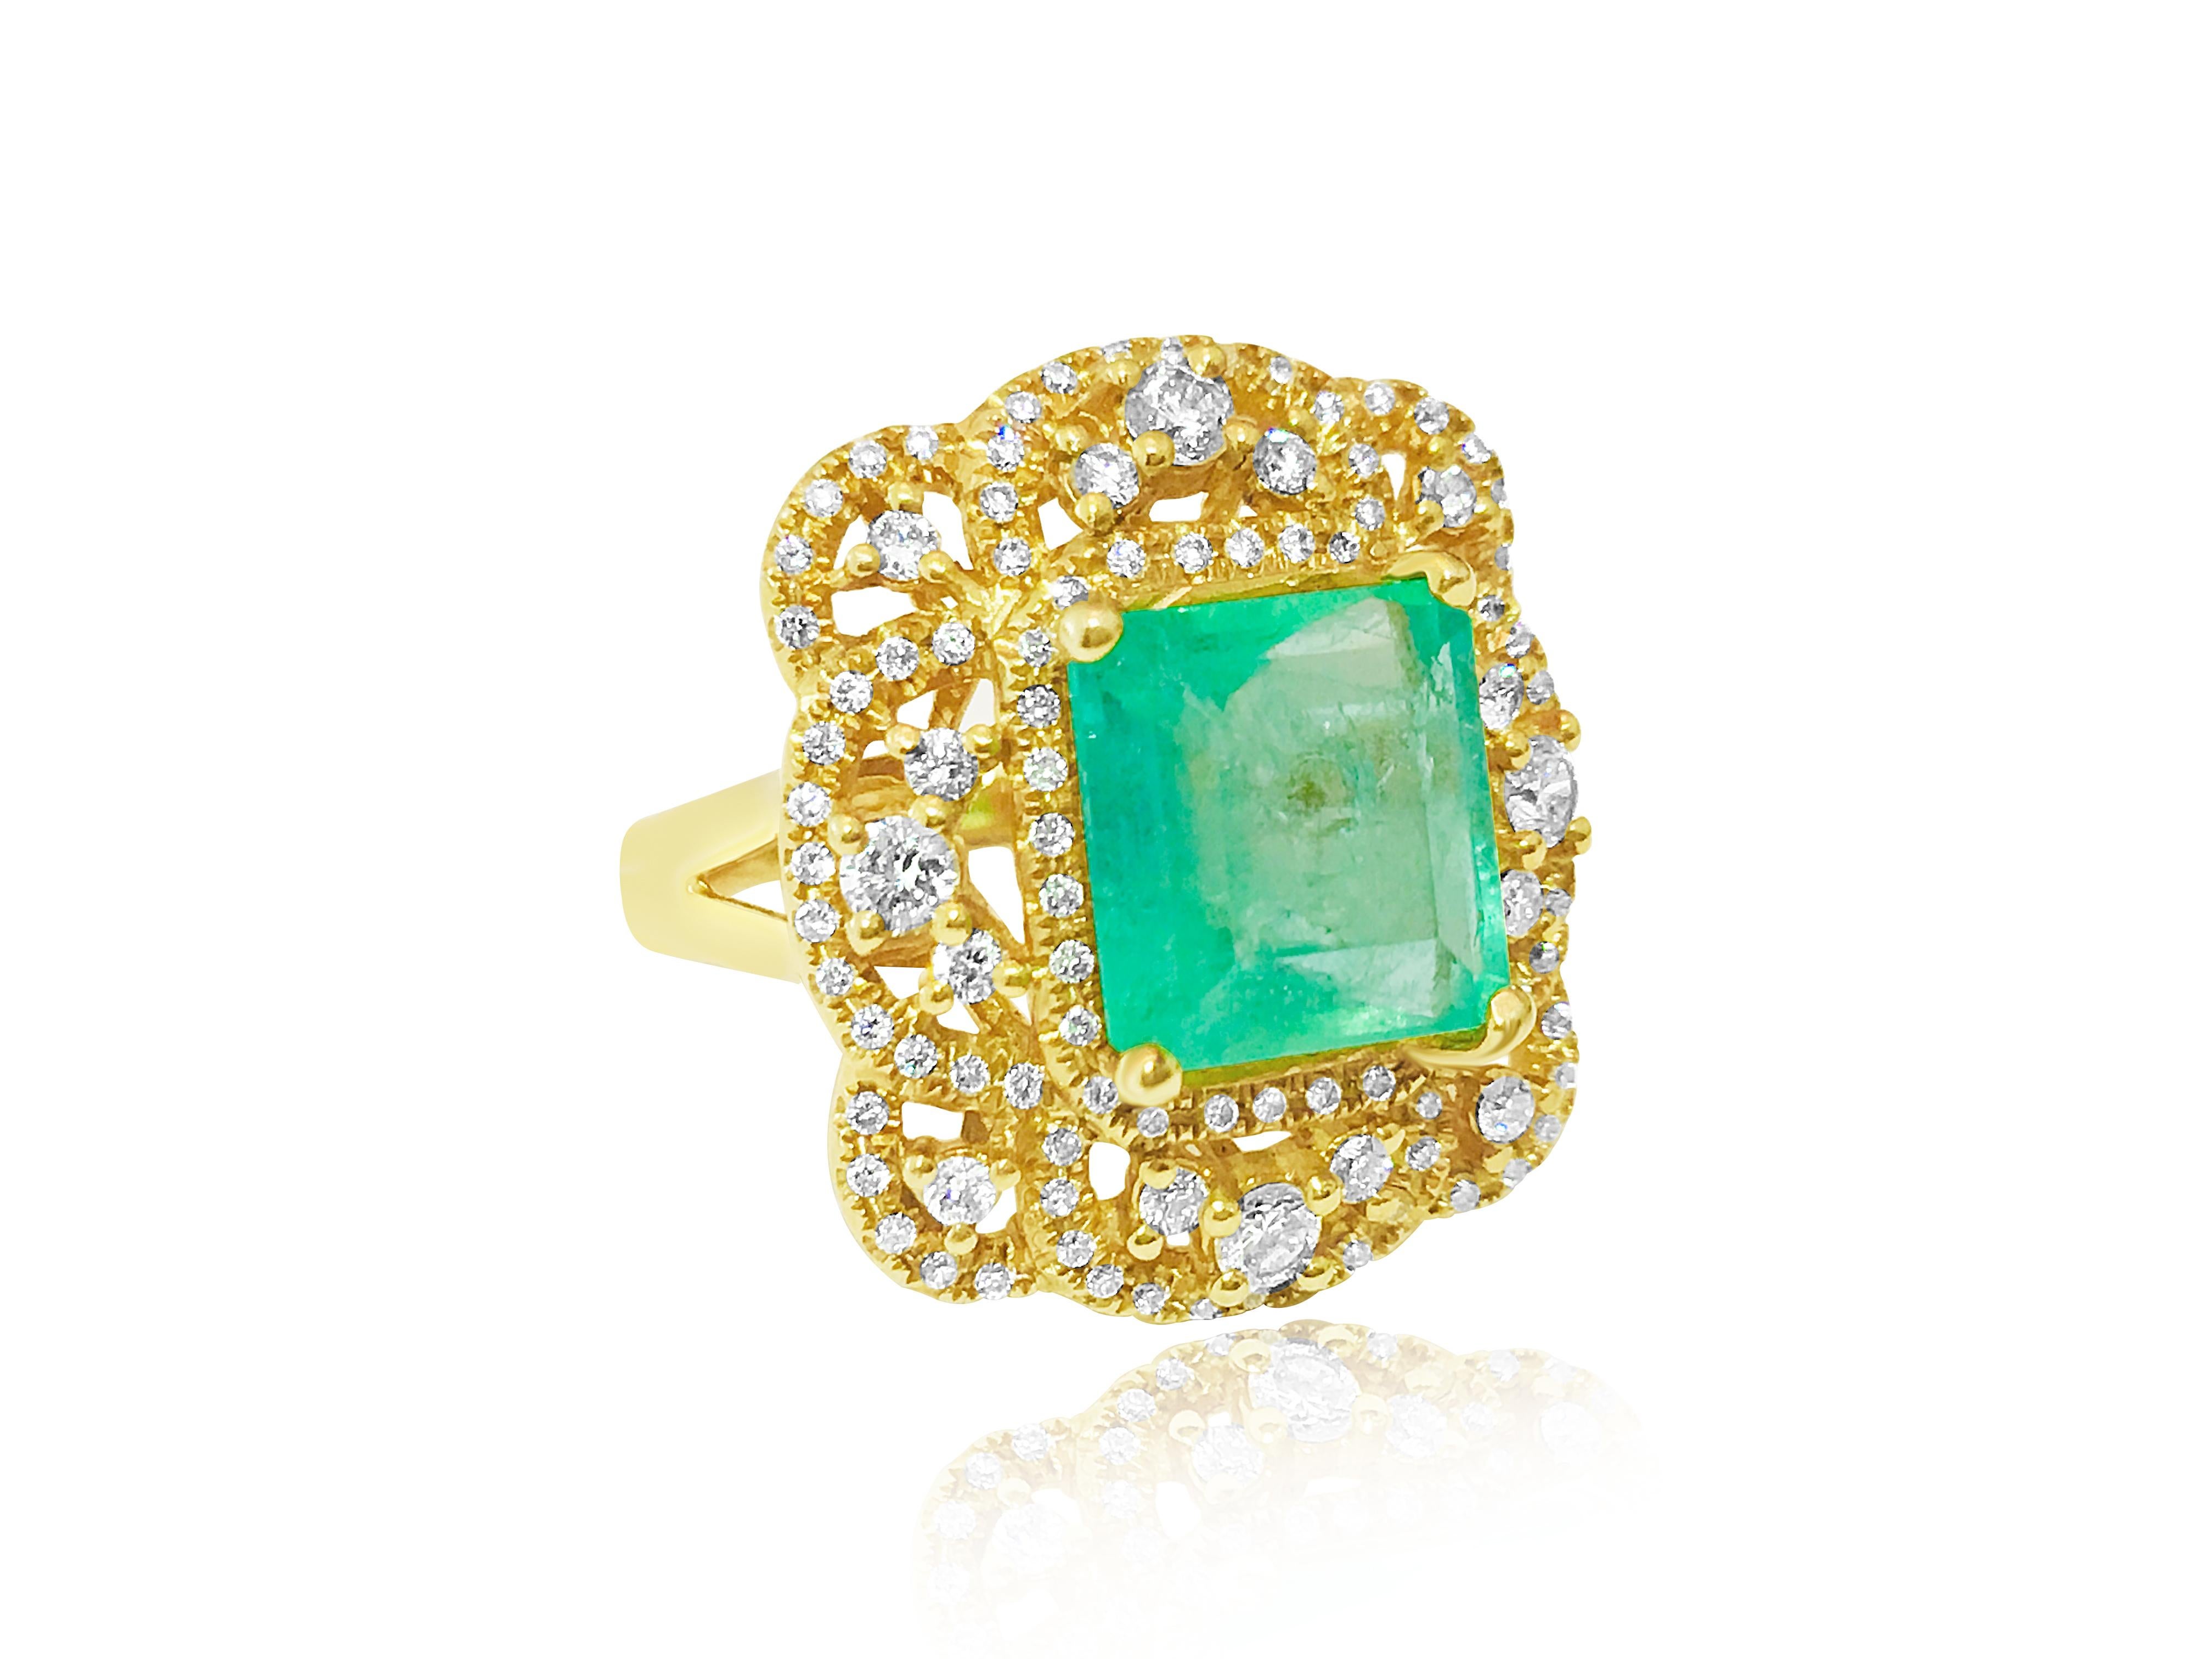 Metal: 18k Yellow Gold.

4.50 carat Colombian emerald. 8.95 X 8.59mm. 100% natural earth mined and genuine. Prong setting. Gorgeous luster and shine. 

1.50 carat Diamonds. VVS2 Clarity and F color. Very Beautiful design and finish.  Diamonds set in